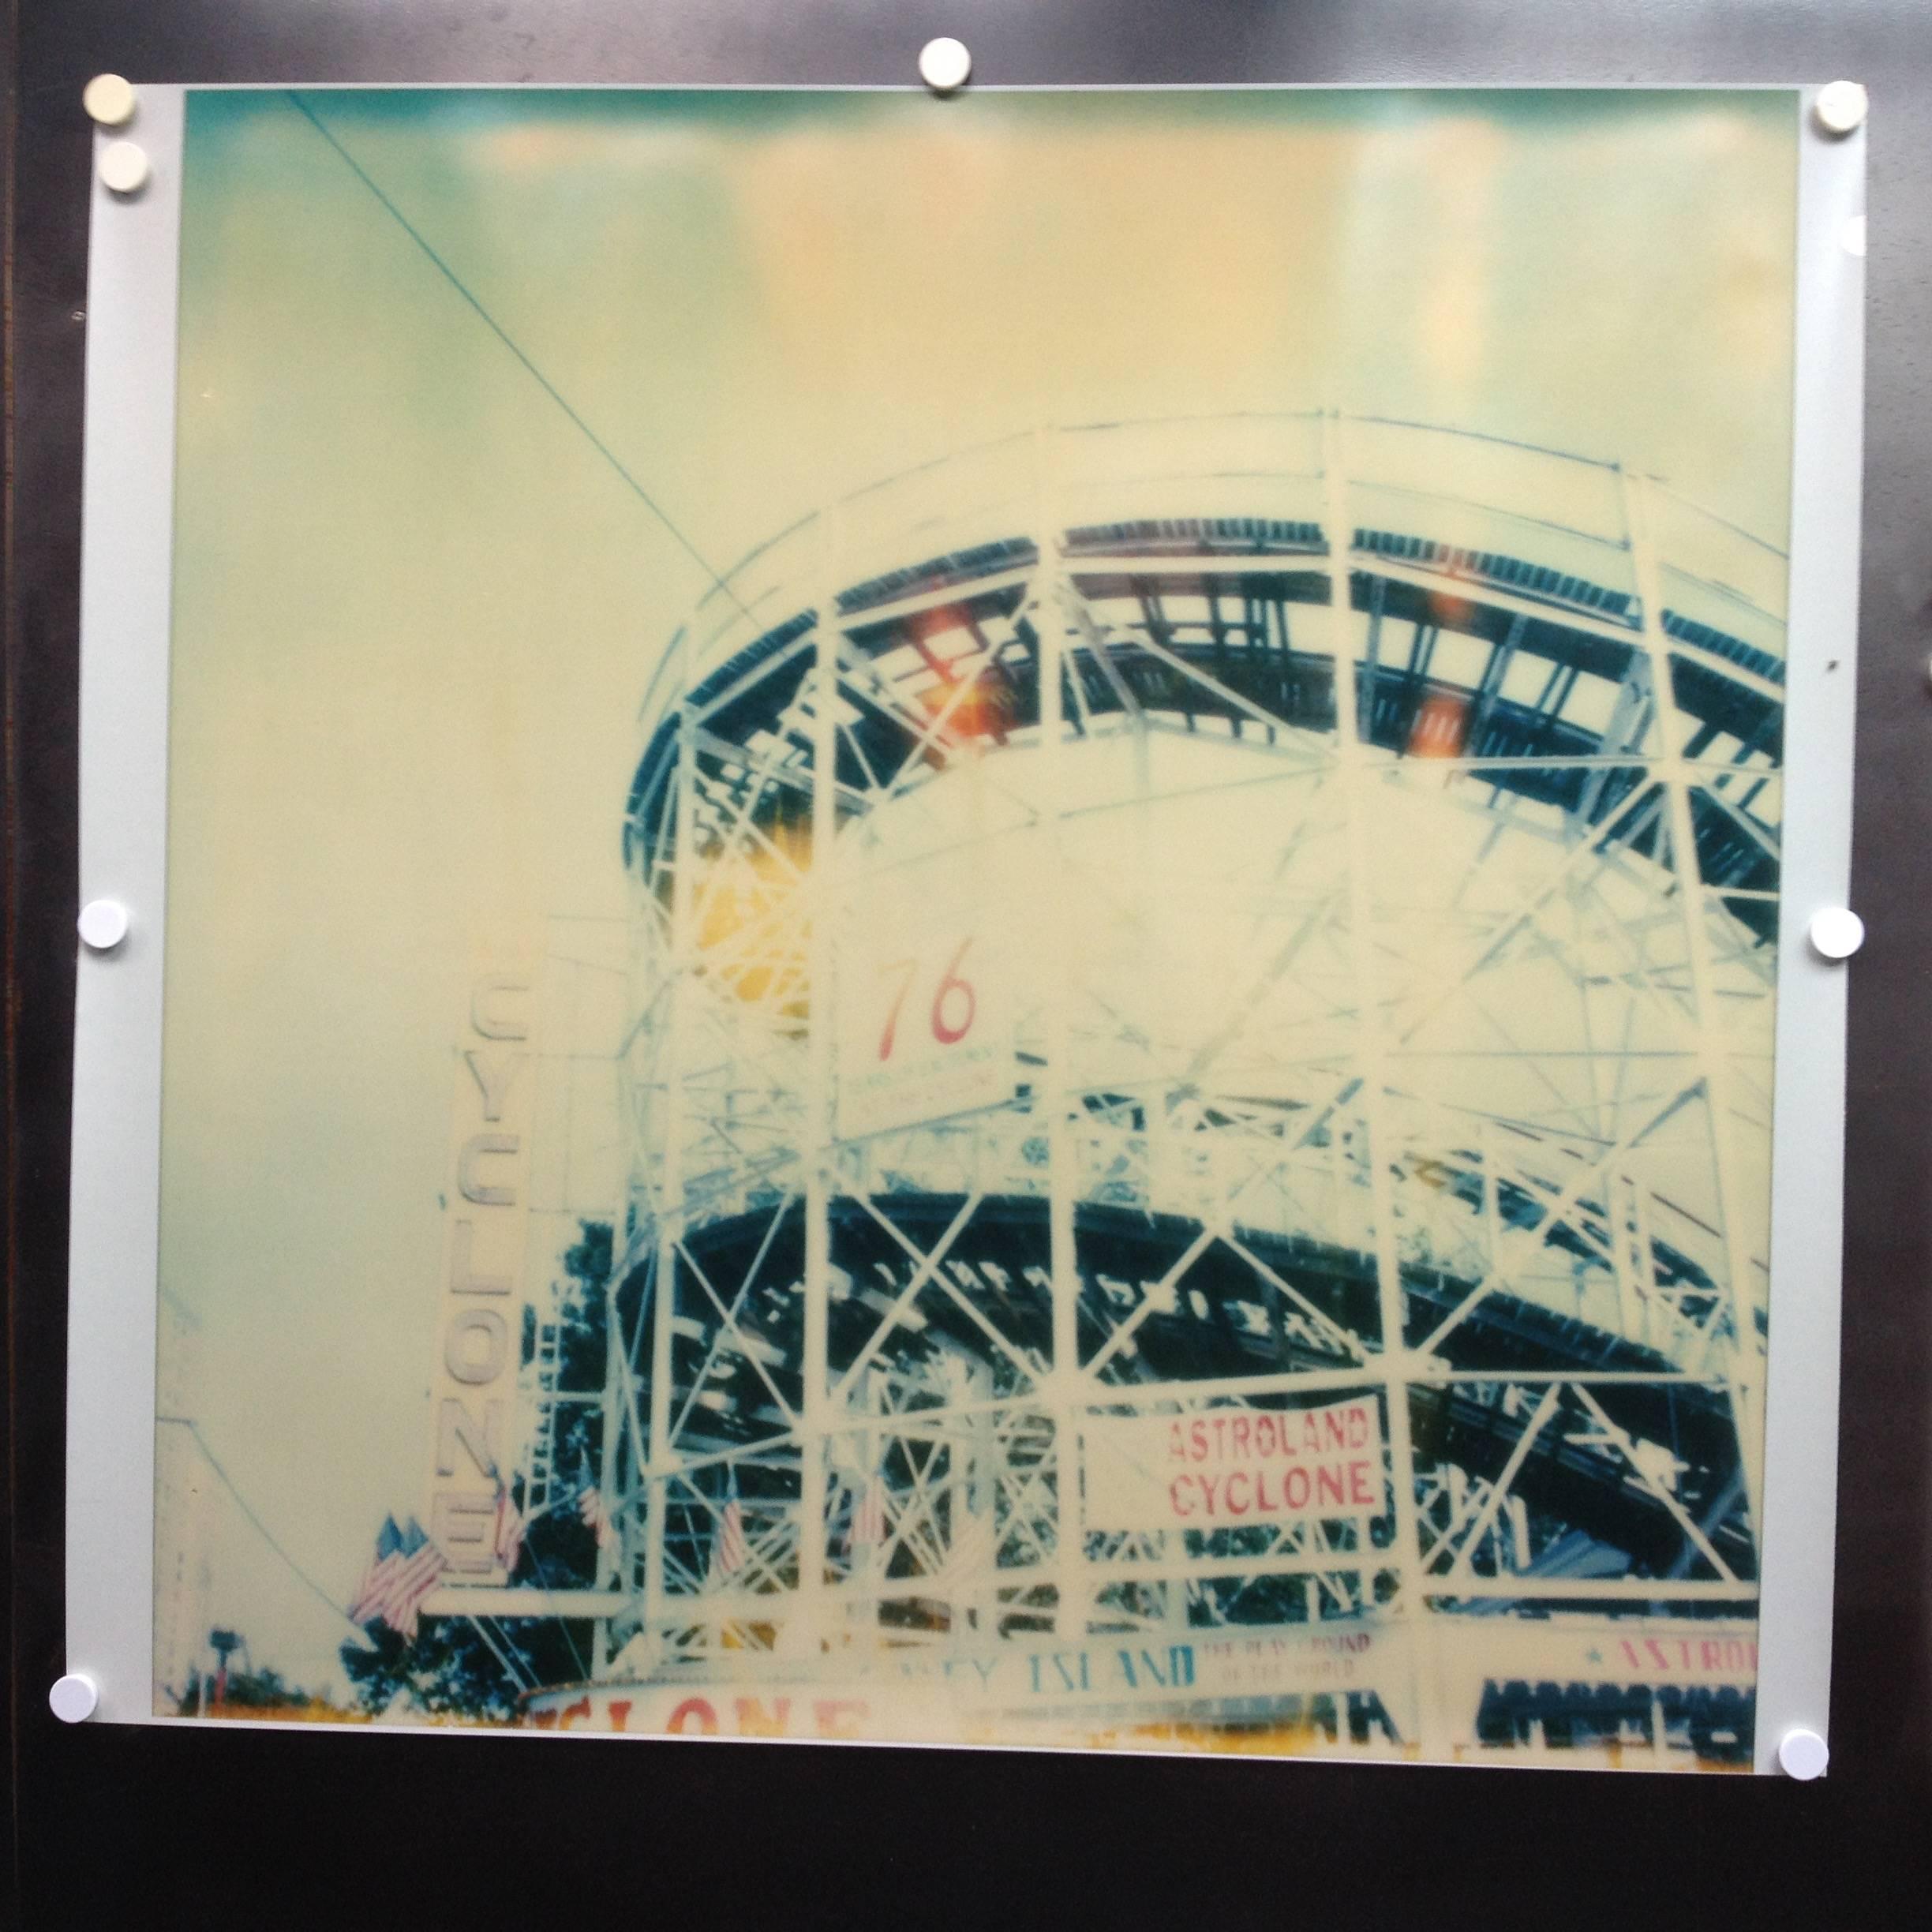 Stefanie Schneider Color Photograph - Cyclone from the movie Stay based on a Polaroid